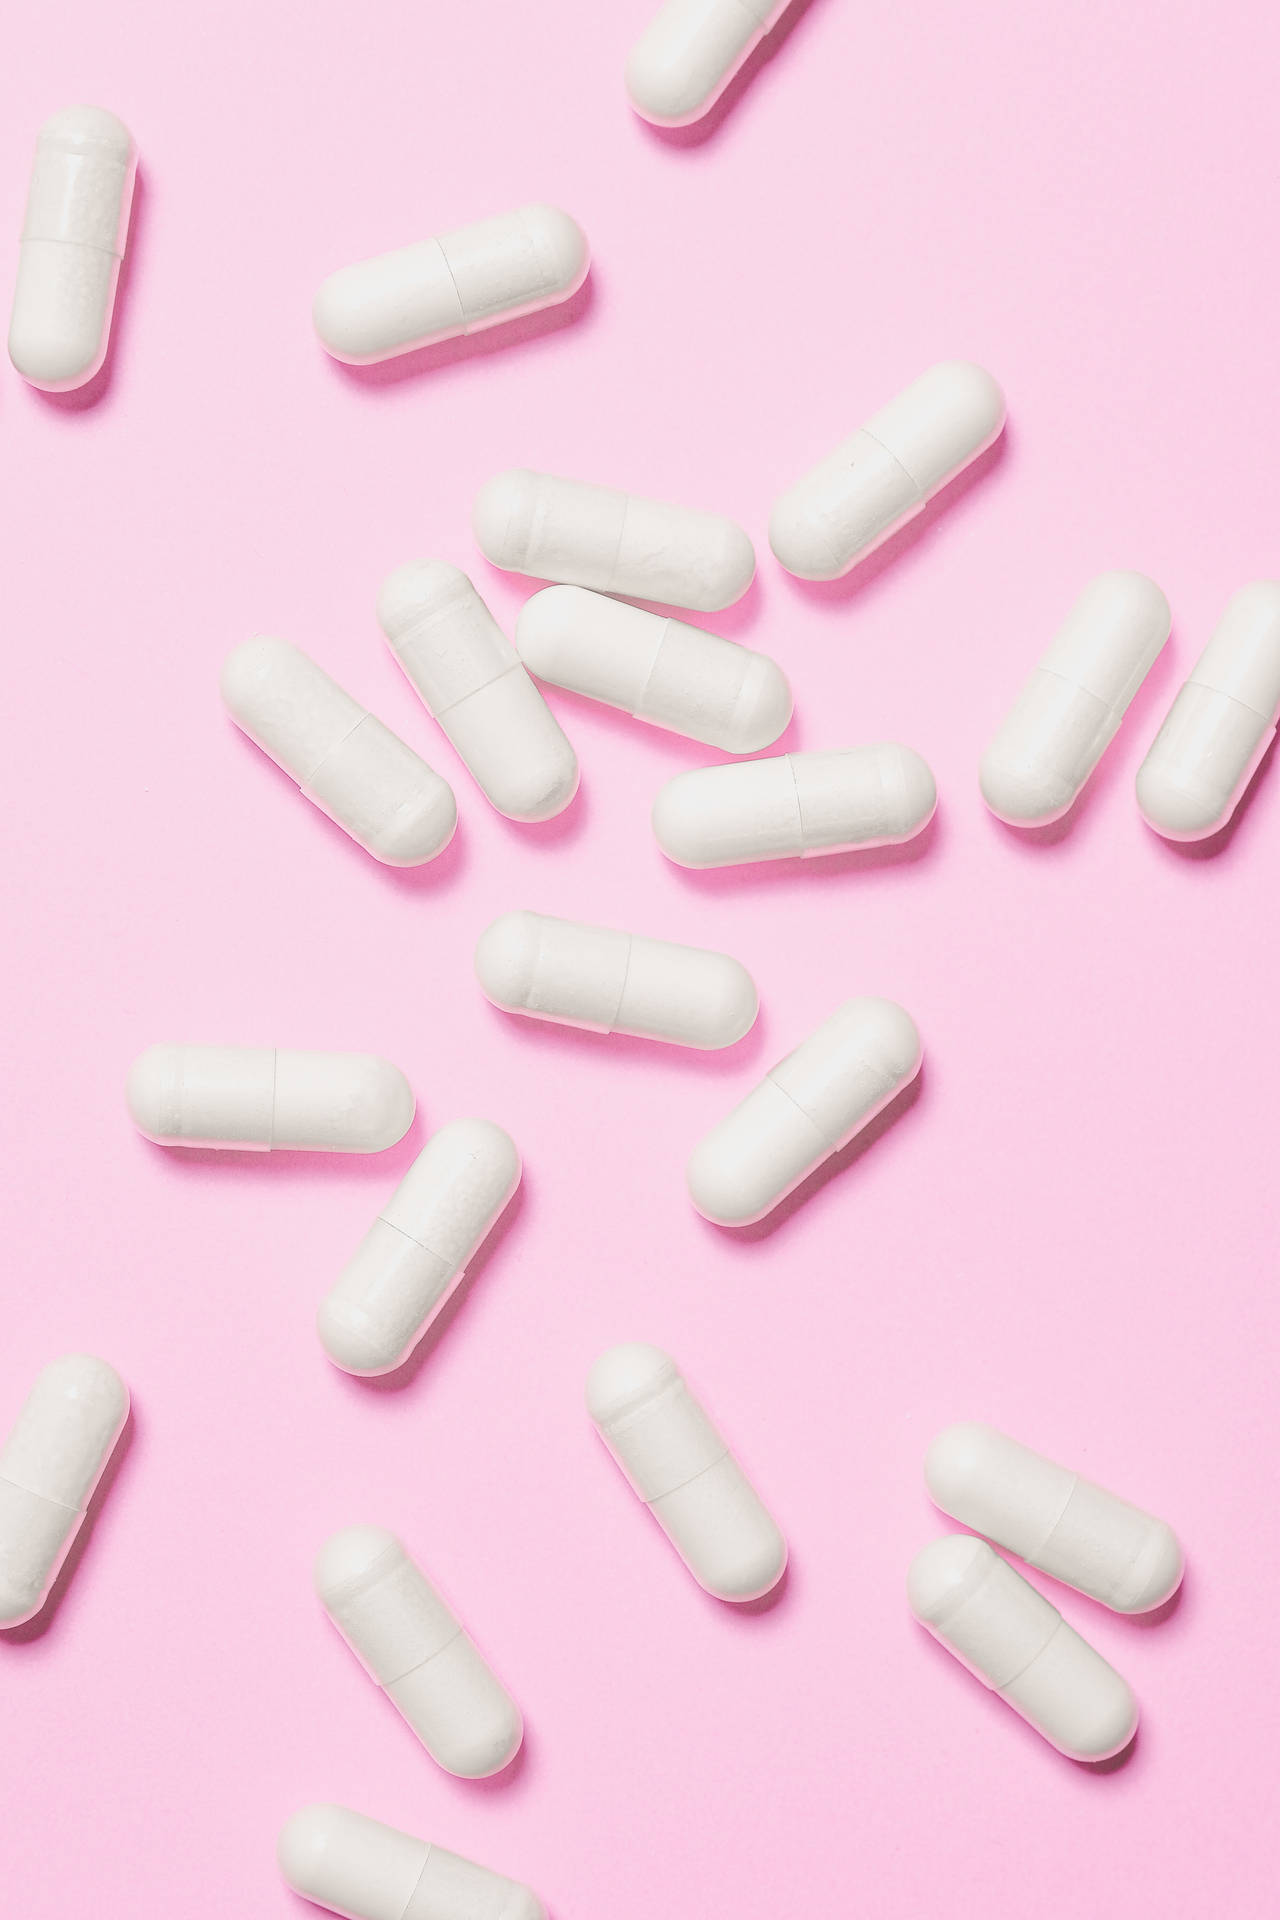 White Capsules On Pink Background Wallpaper